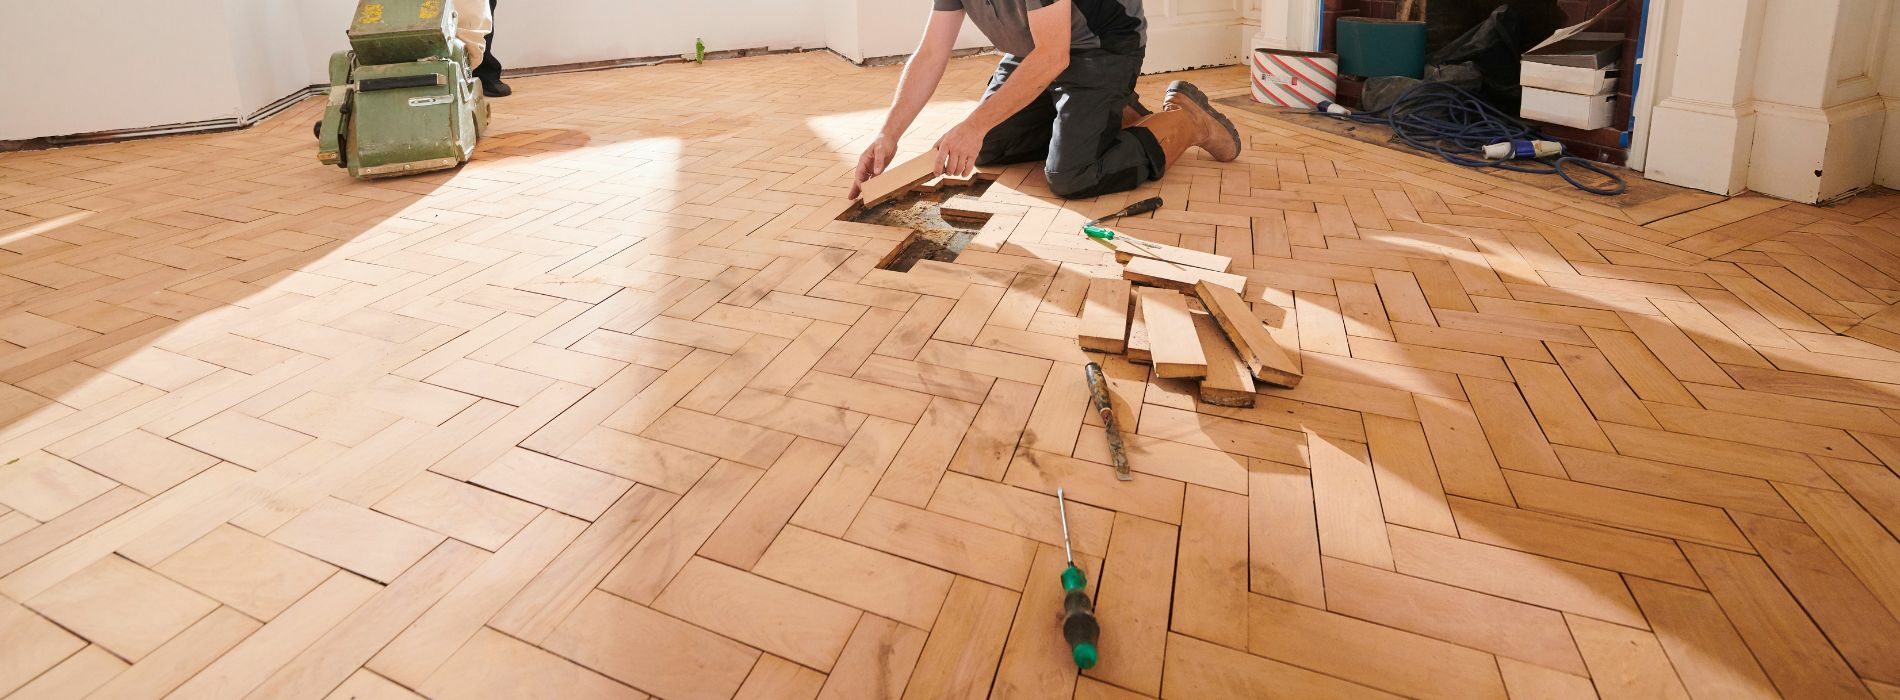 a man is working on a wooden floor.